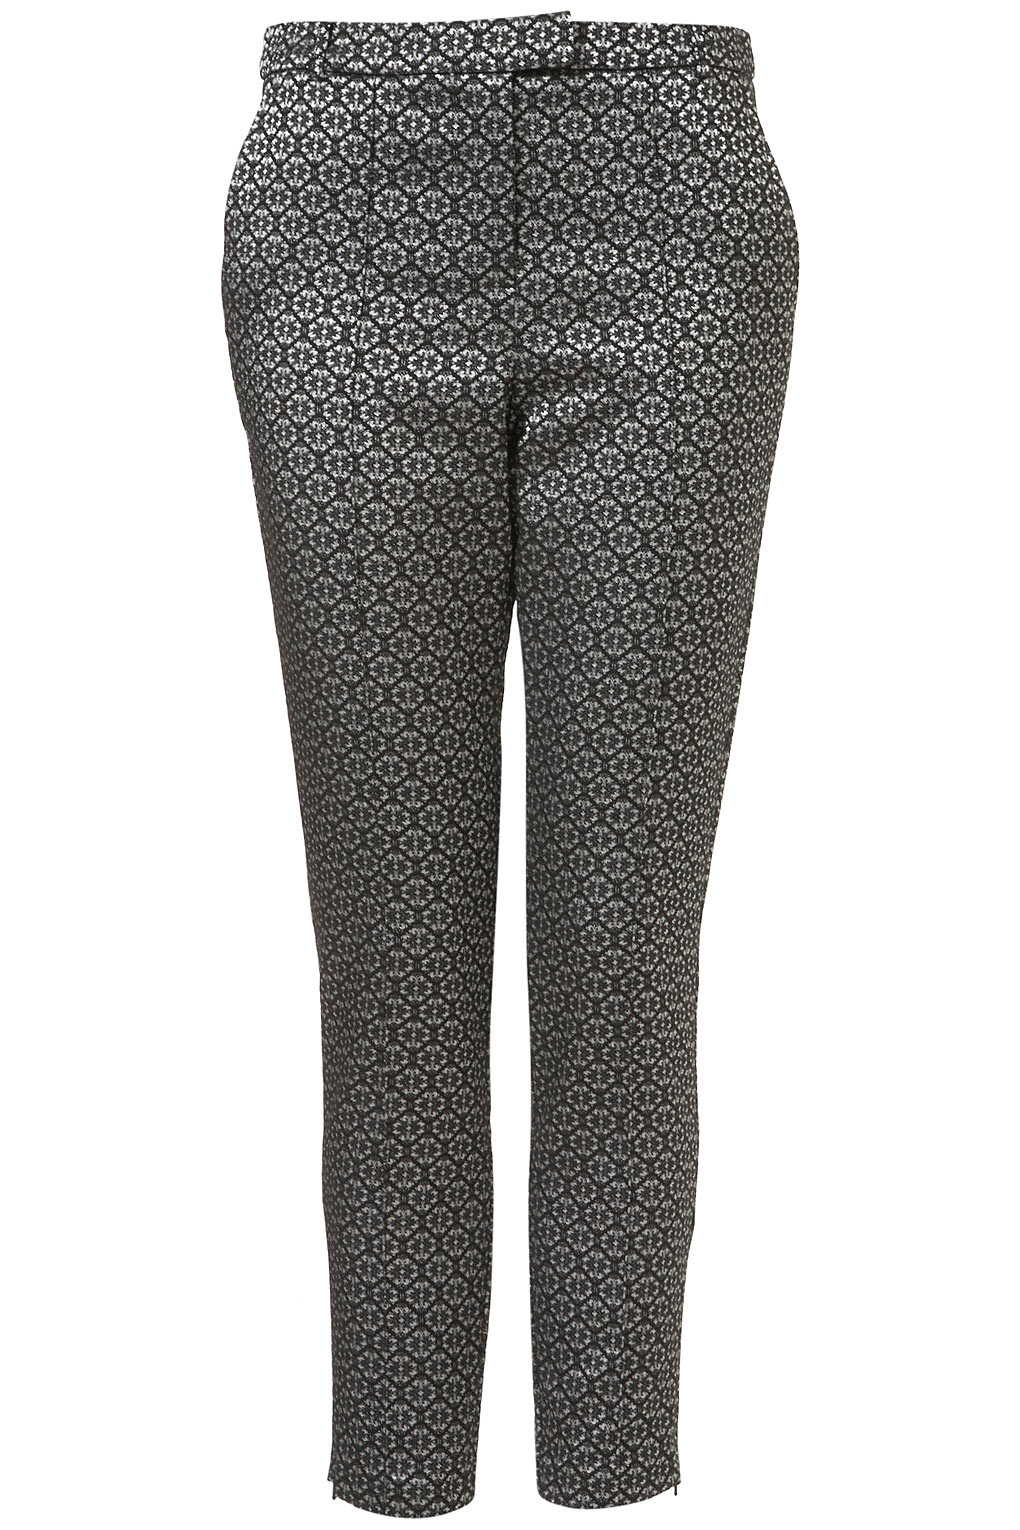 Lyst - Topshop Tiled Print Jacquard Cigarette Trousers in Gray